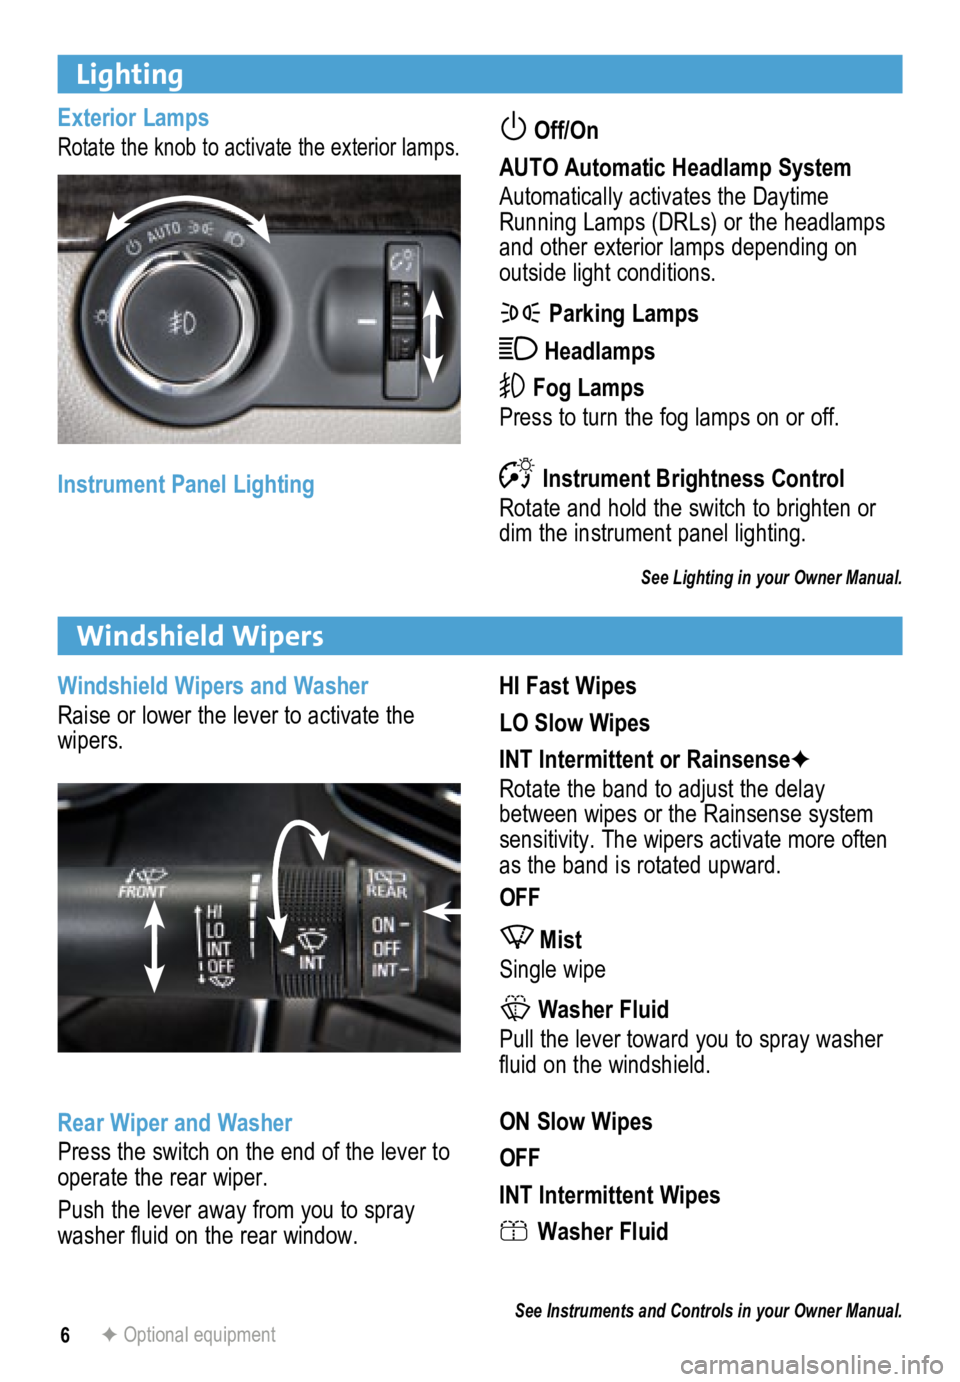 BUICK ENCORE 2013  Get To Know Guide 6
Lighting
Exterior Lamps
Rotate the knob to activate the exterior lamps. Off/On 
AUTO Automatic Headlamp System
Automatically activates the Daytime 
Running Lamps (DRLs) or the headlamps 
and other e